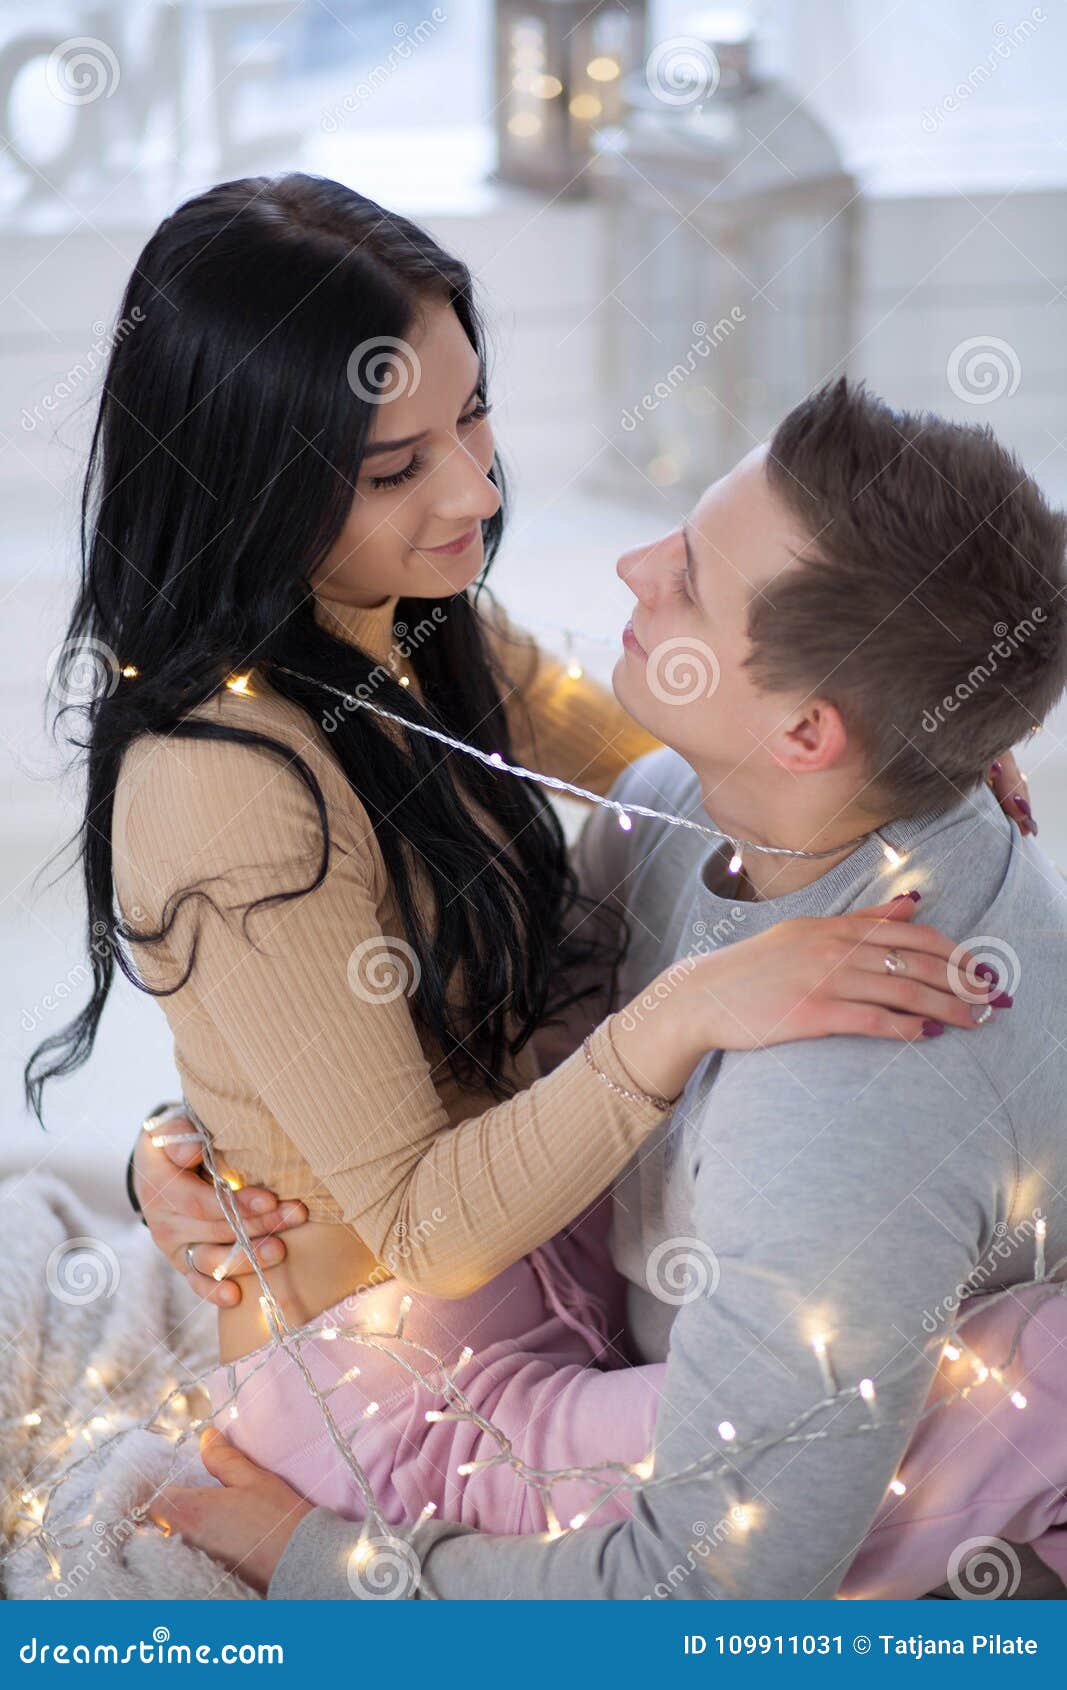 Couple in Love Hugging and Kissing at Home Stock Image - Image of ...